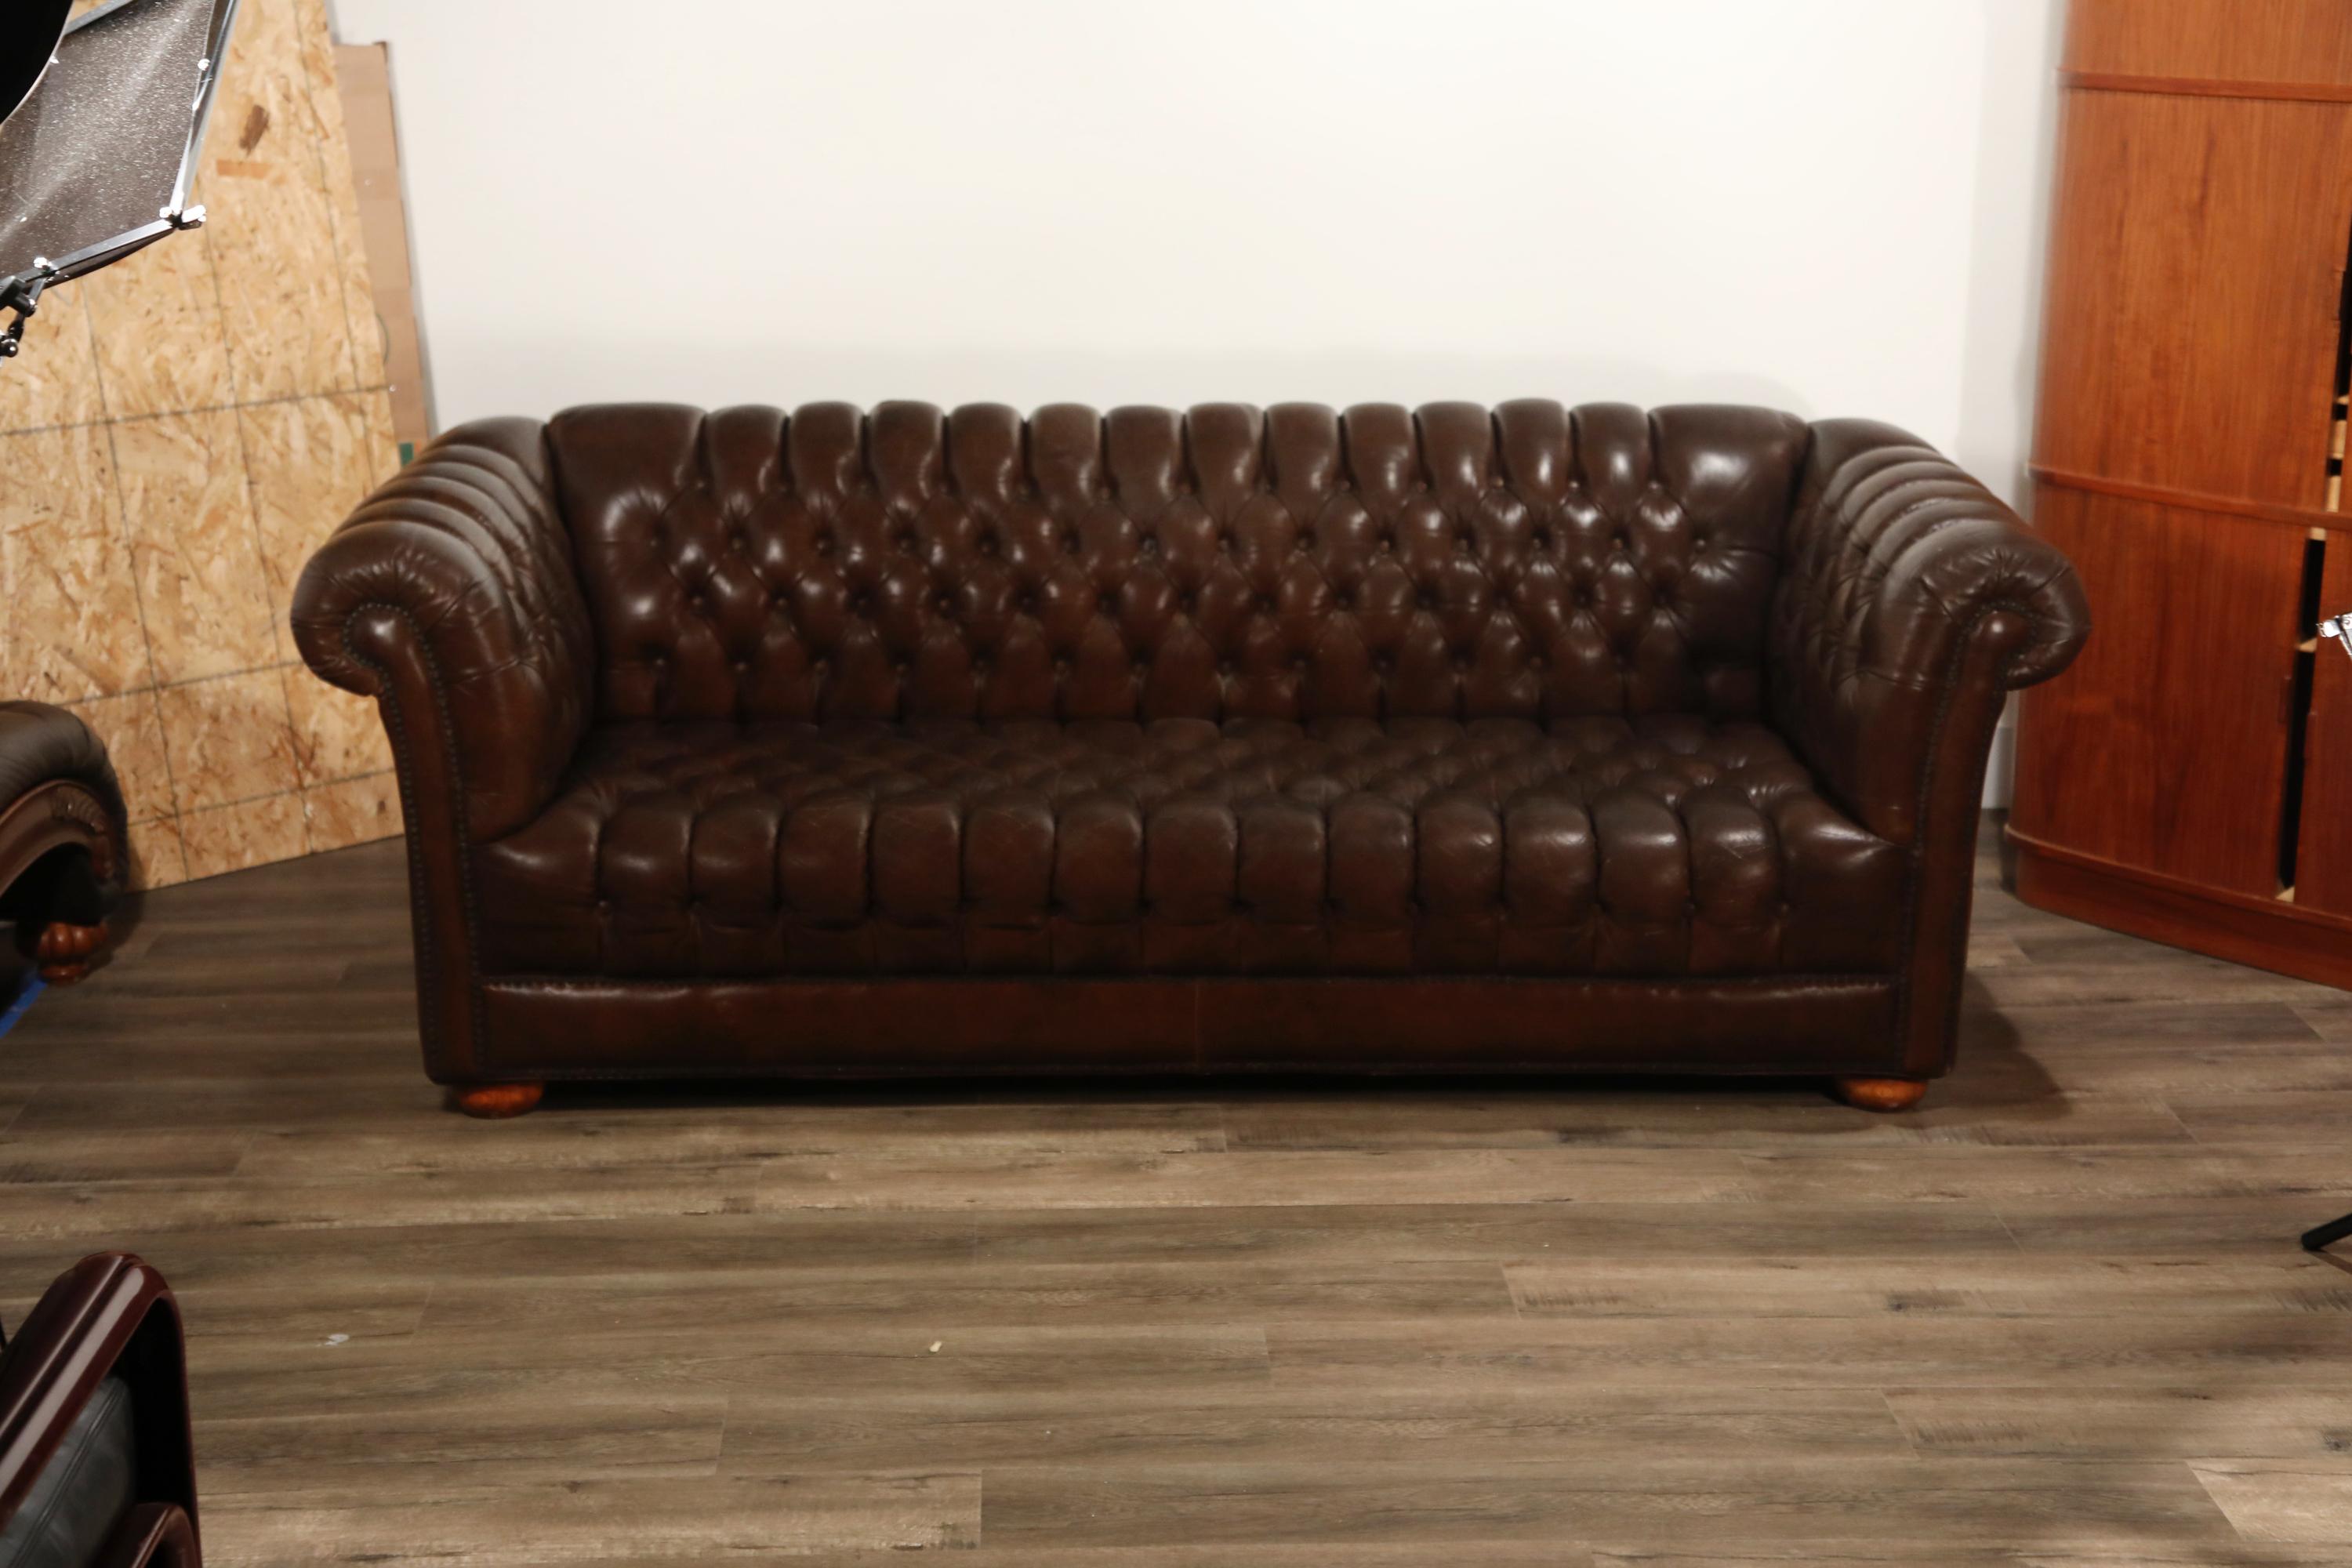 Handsome brown leather Chesterfield sofa displaying the classic attributes of this time honored design including the rolled back and armrests. This sofa is upholstered in a rich brown leather which has developed an admirable patina. The seat, inside